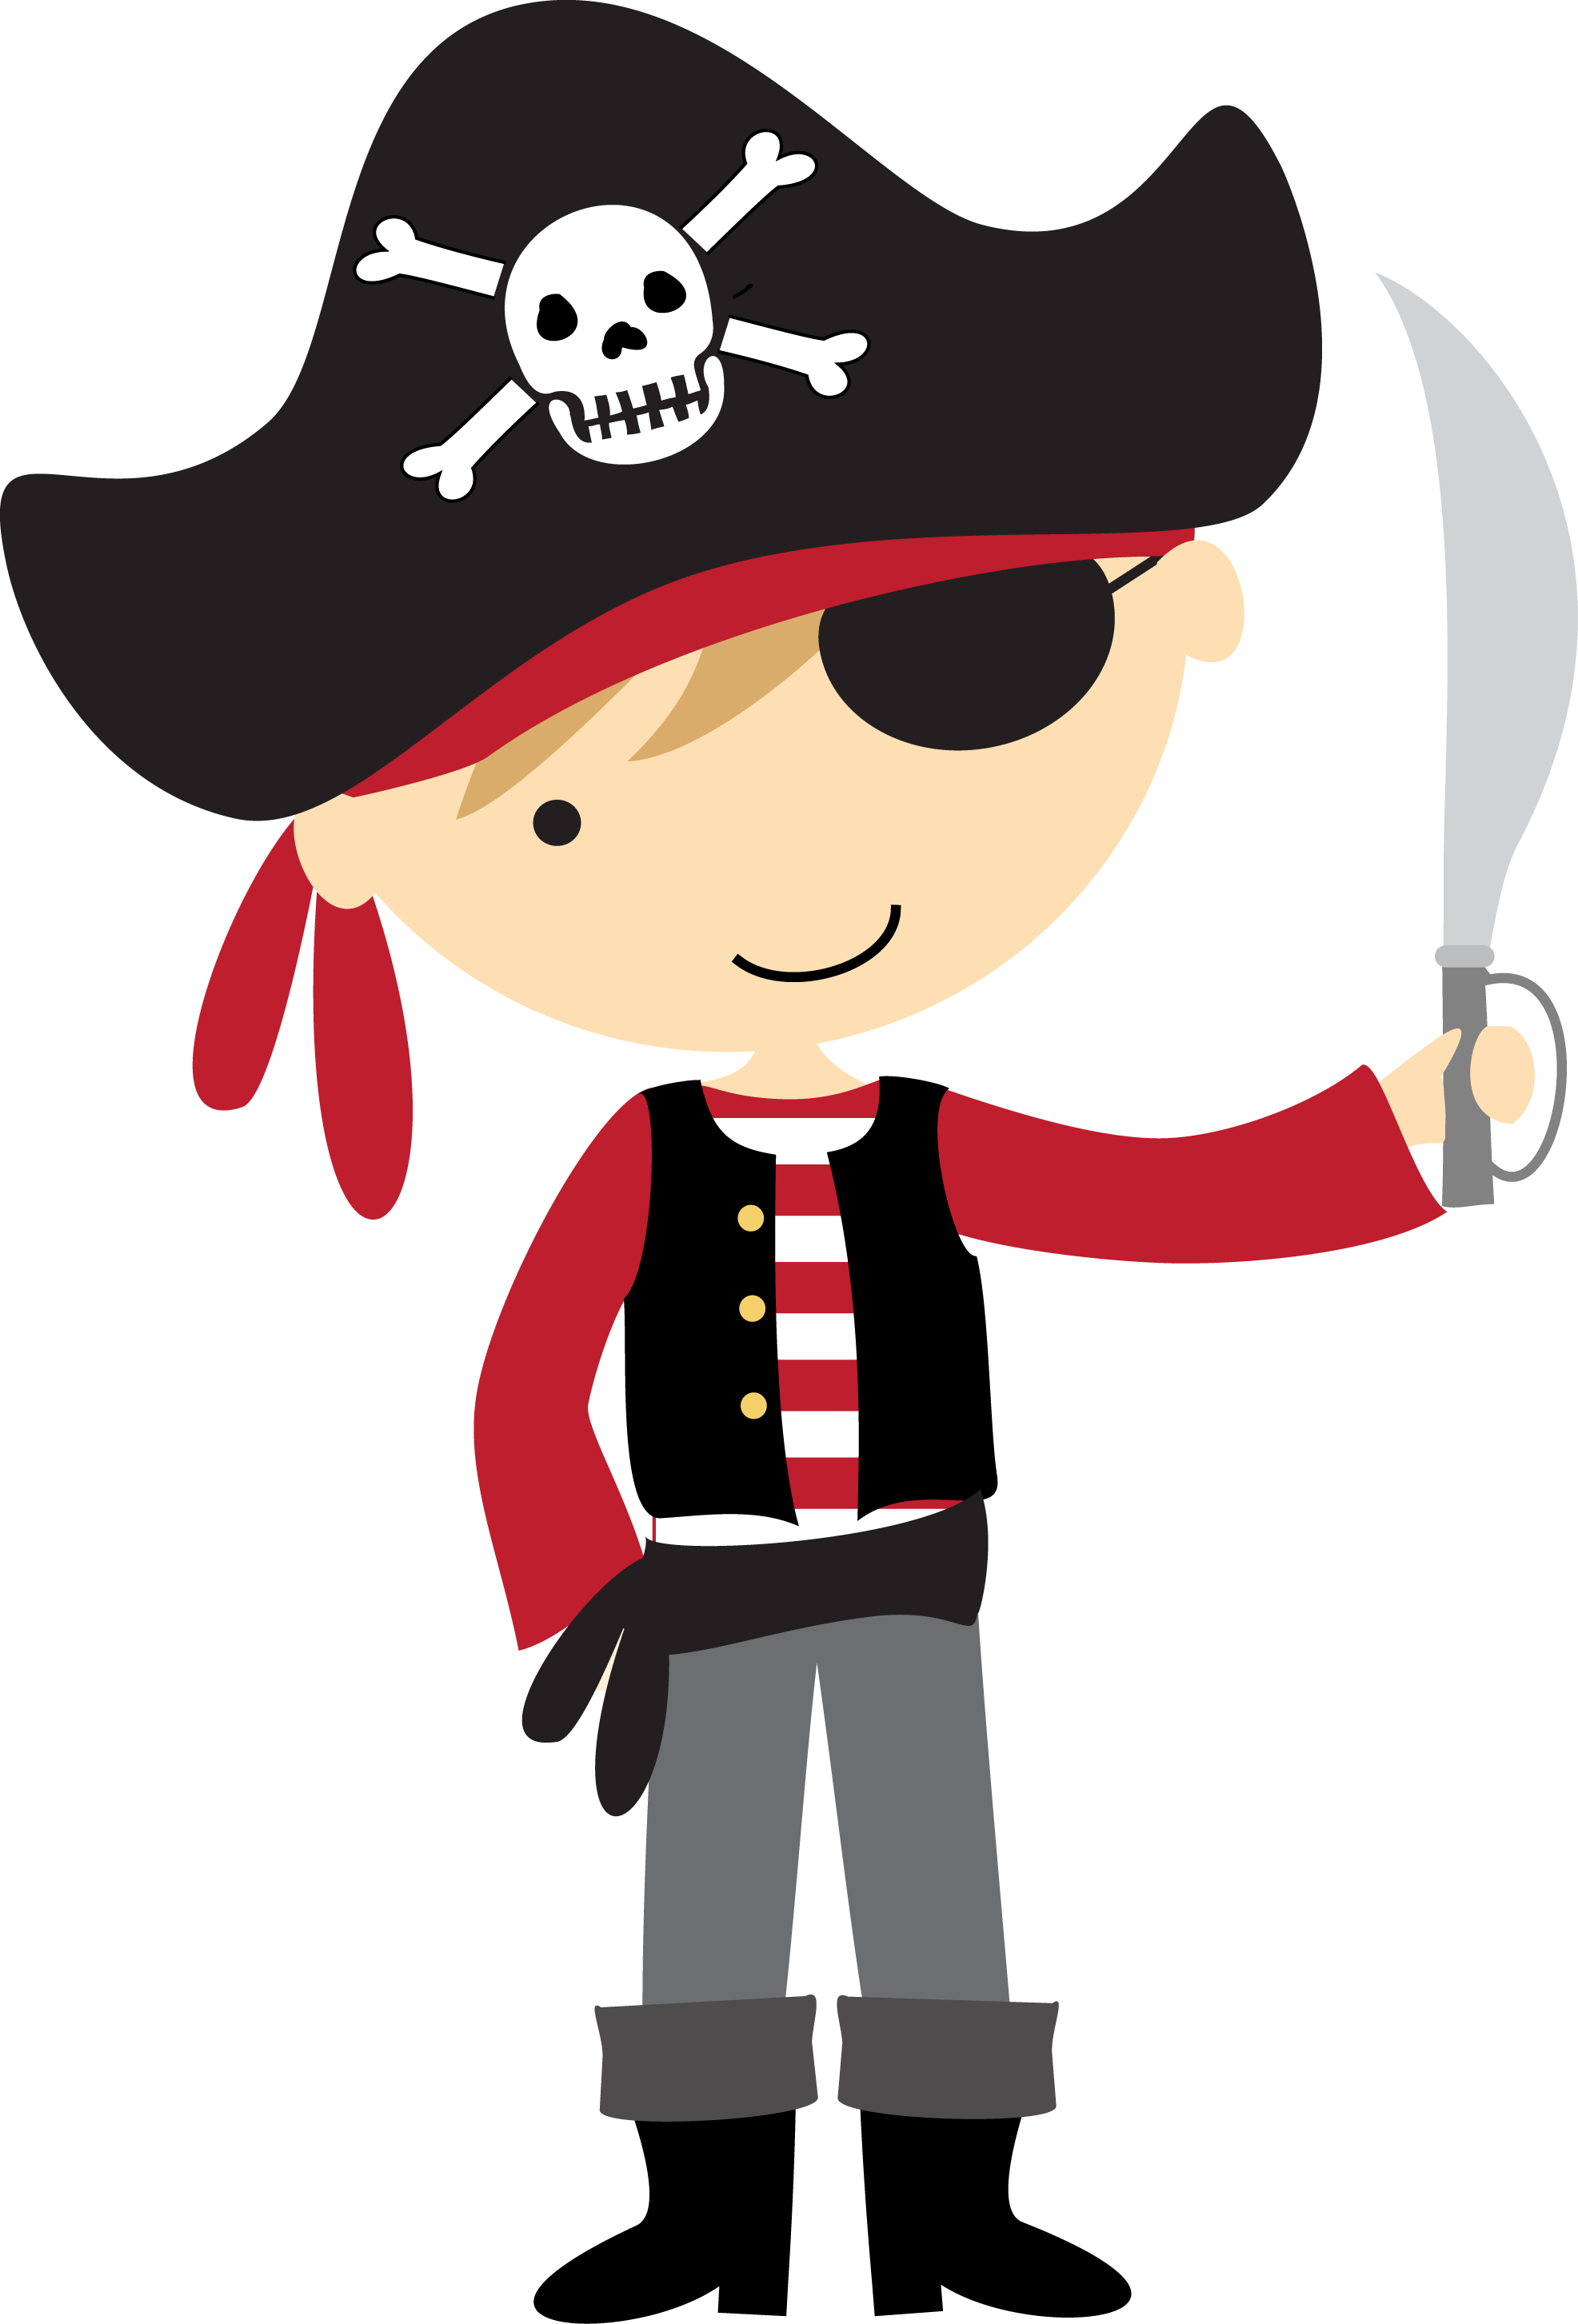 Piracy Pirate Party Clip art